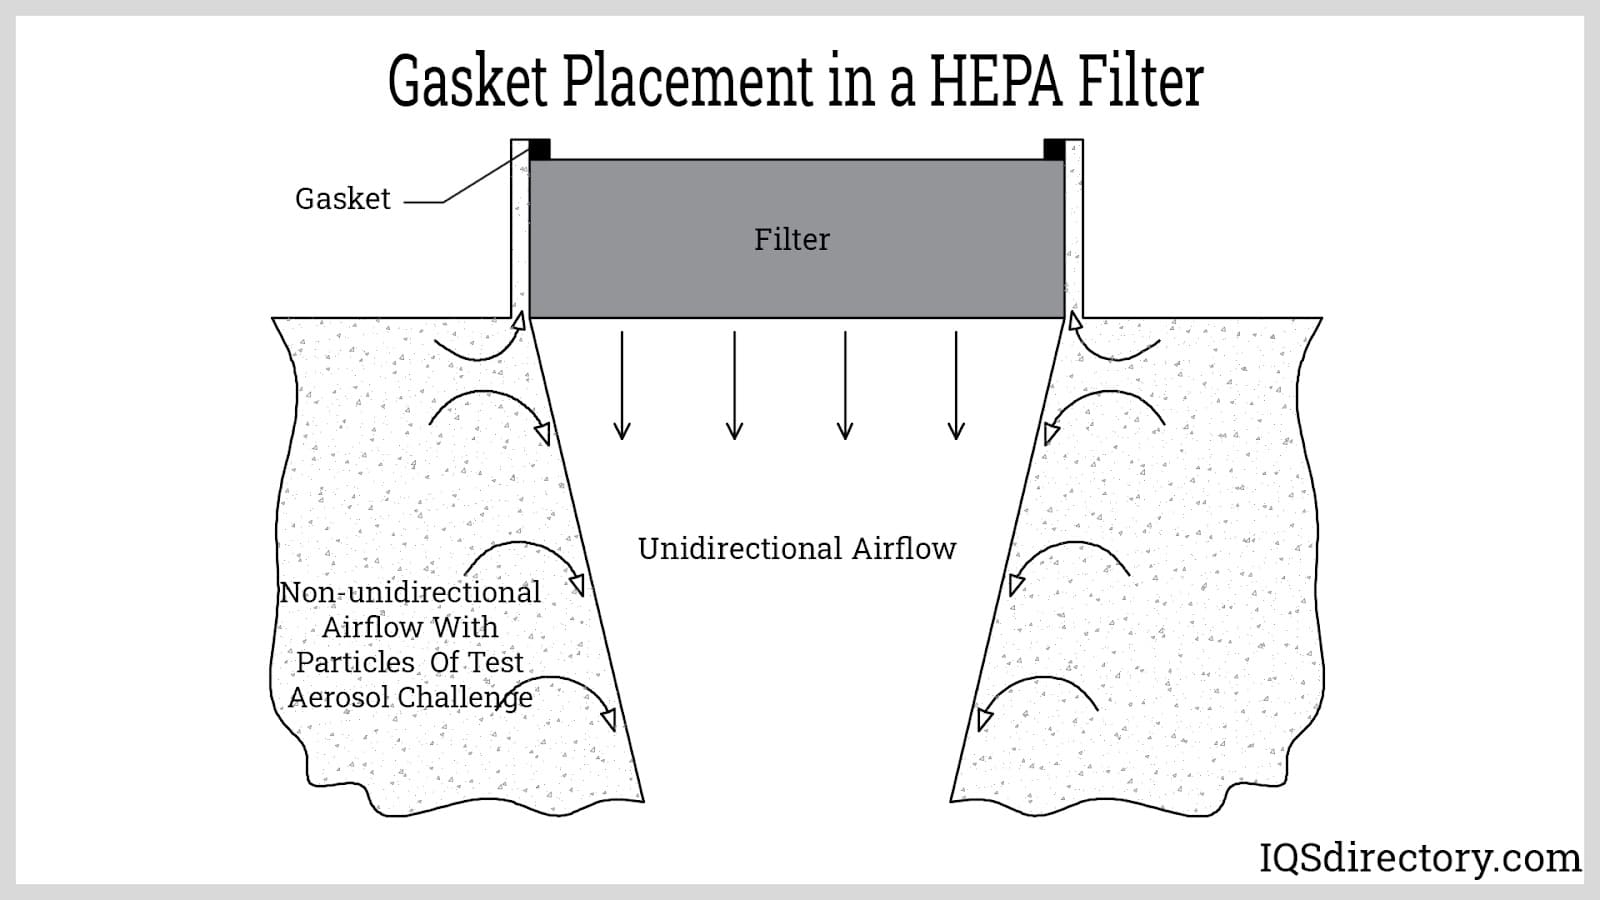 Gasket Placement in a HEPA Filter